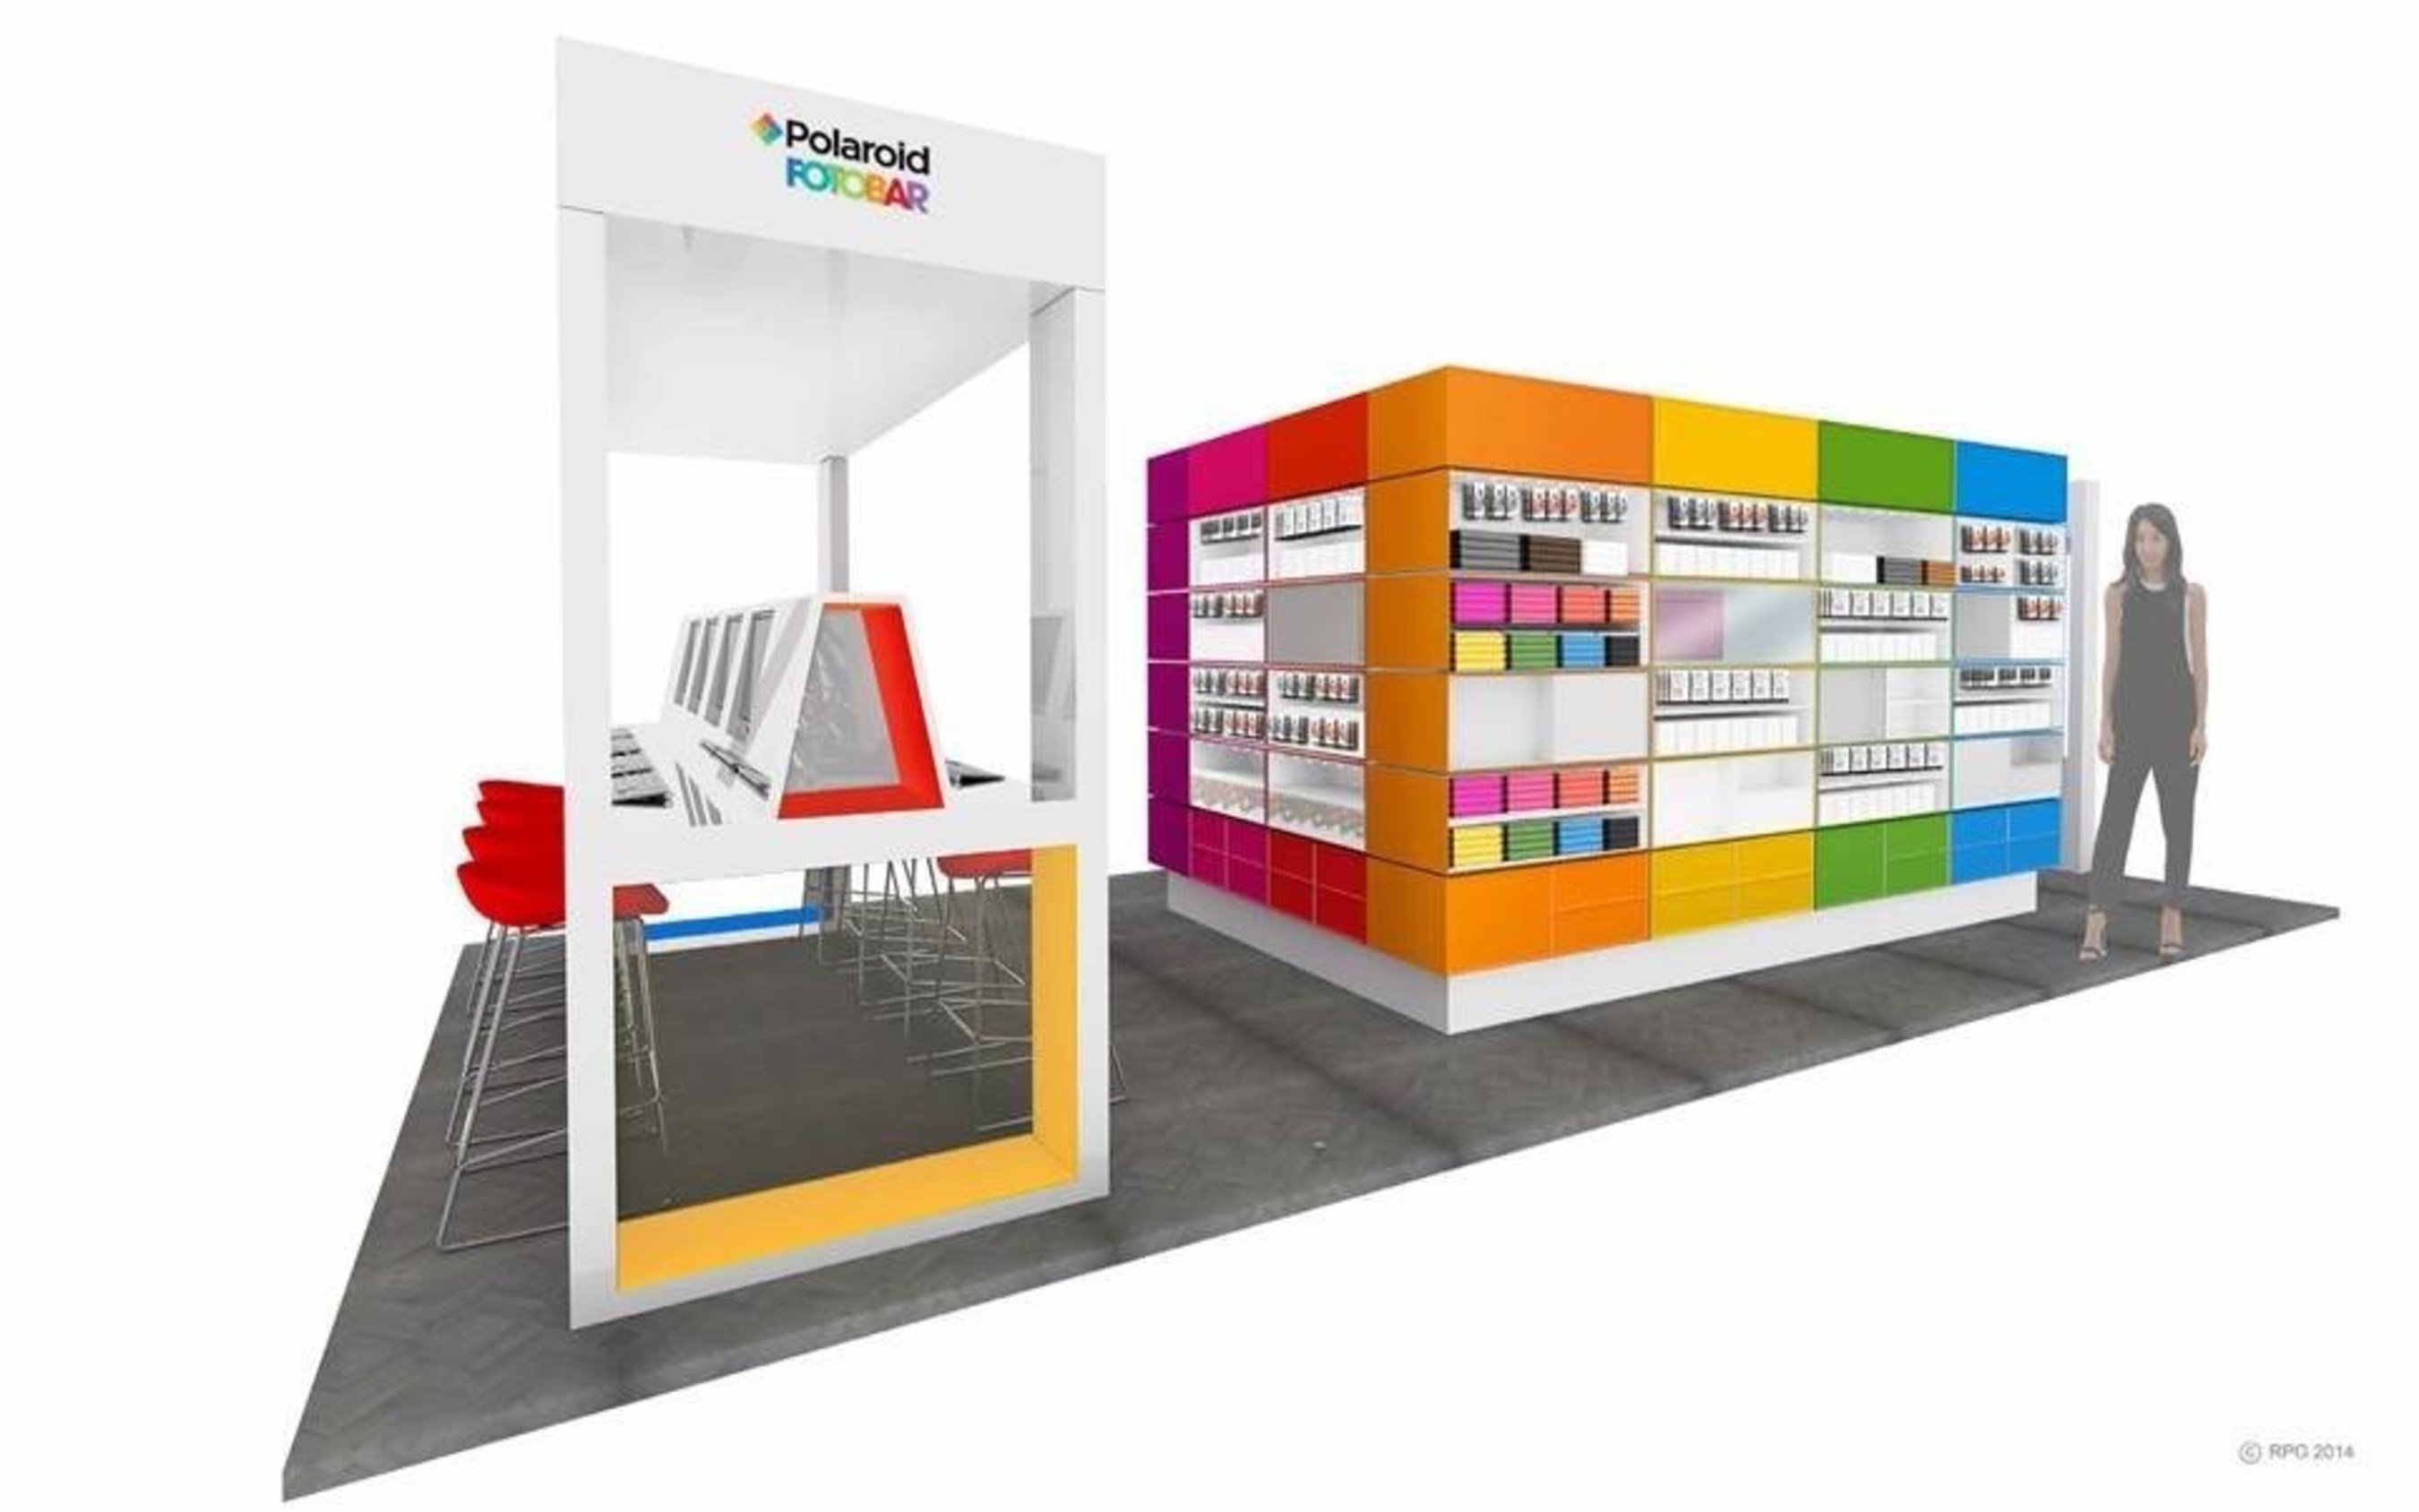 Polaroid Fotobar announced plans for seven micro-retail locations in Southern and Northern California at Westfield Malls.  All locations, similar to this rendering, will open before the Thanksgiving holiday.